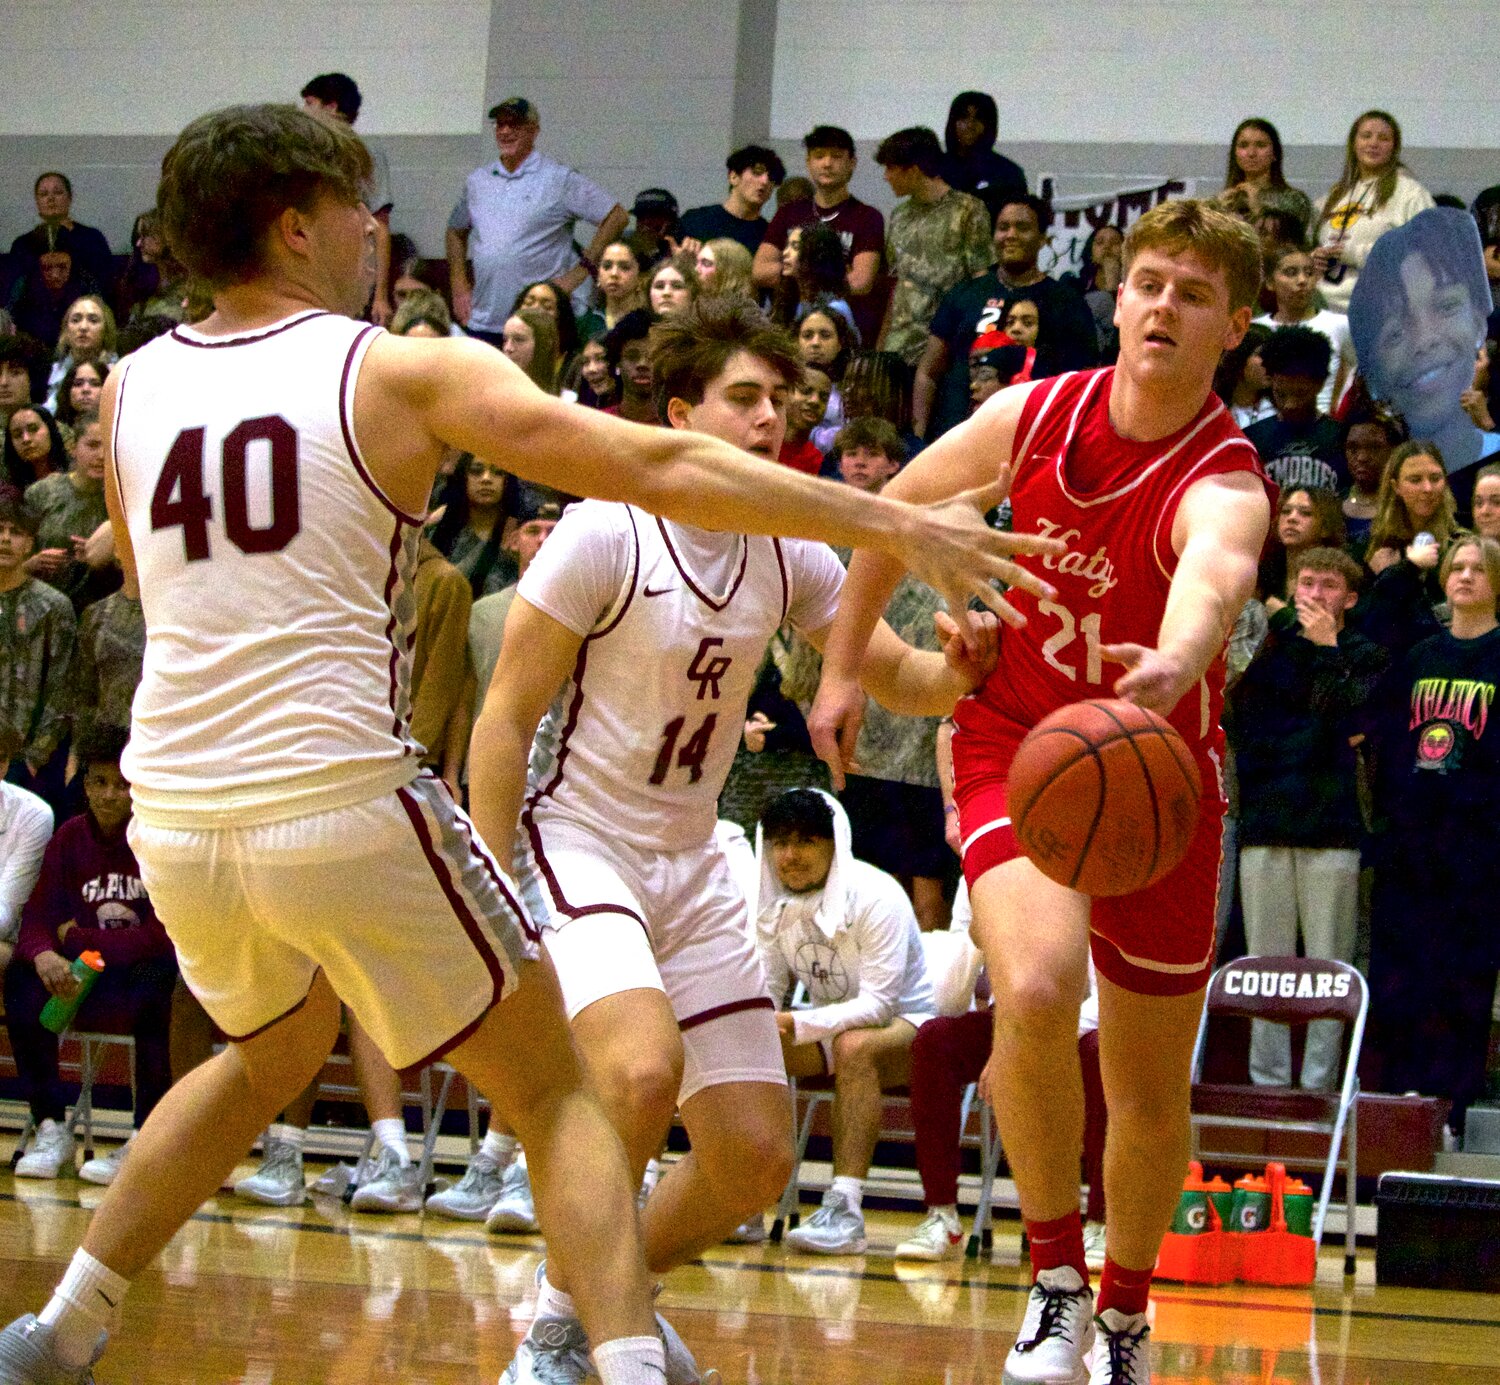 Brady Willis passes the ball along the baseline during Wednesday’s game between Katy and Cinco Ranch at the Cinco Ranch gym.